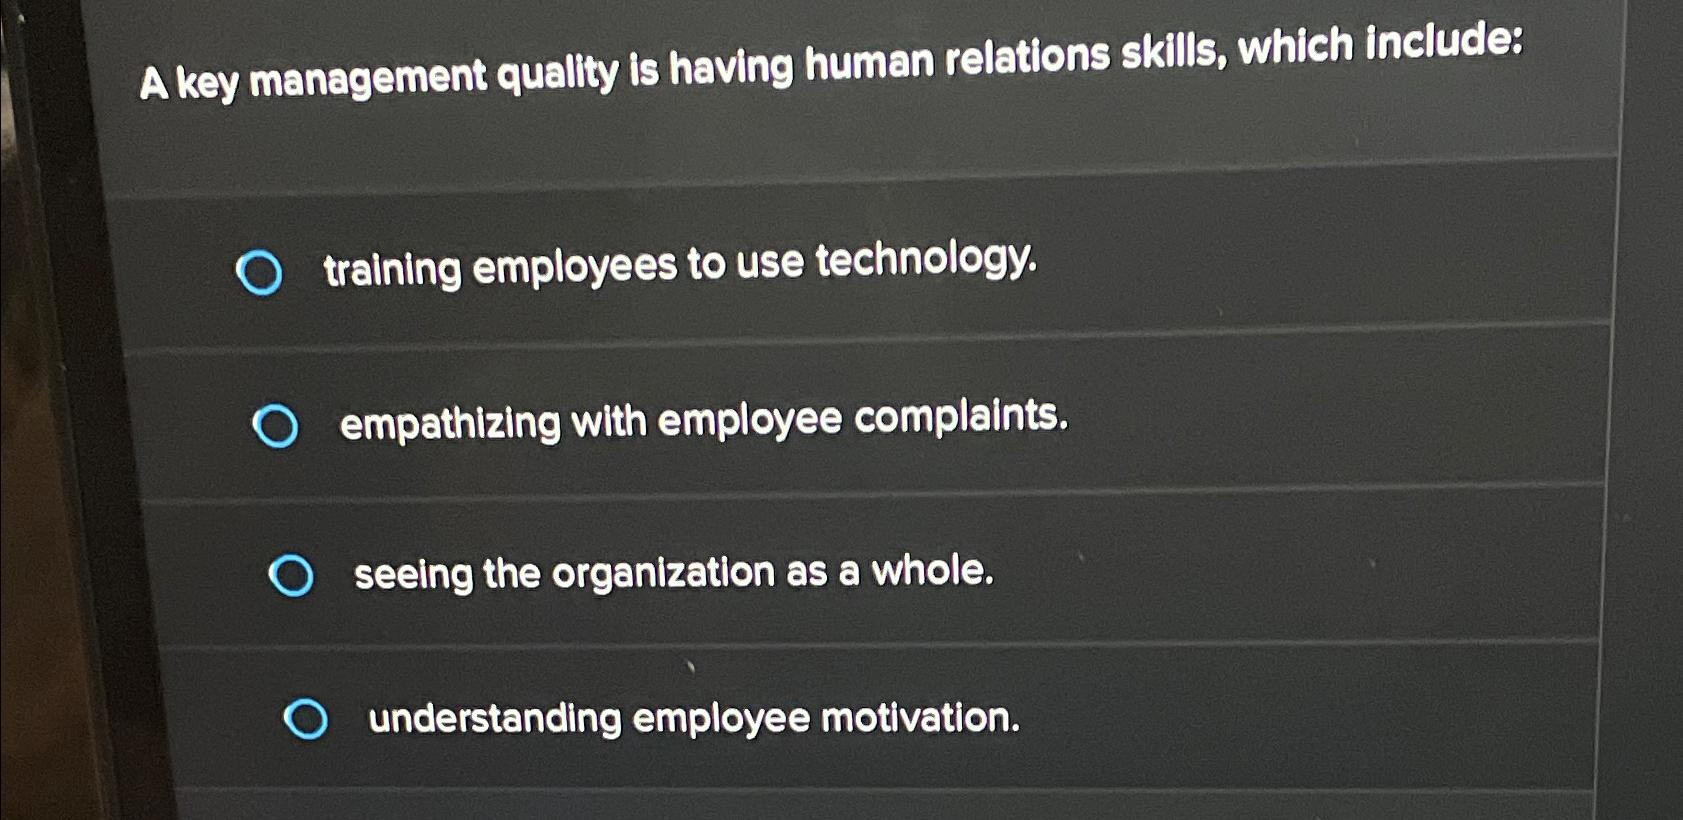 A key management quality is having human relations skills, which include: training employees to use